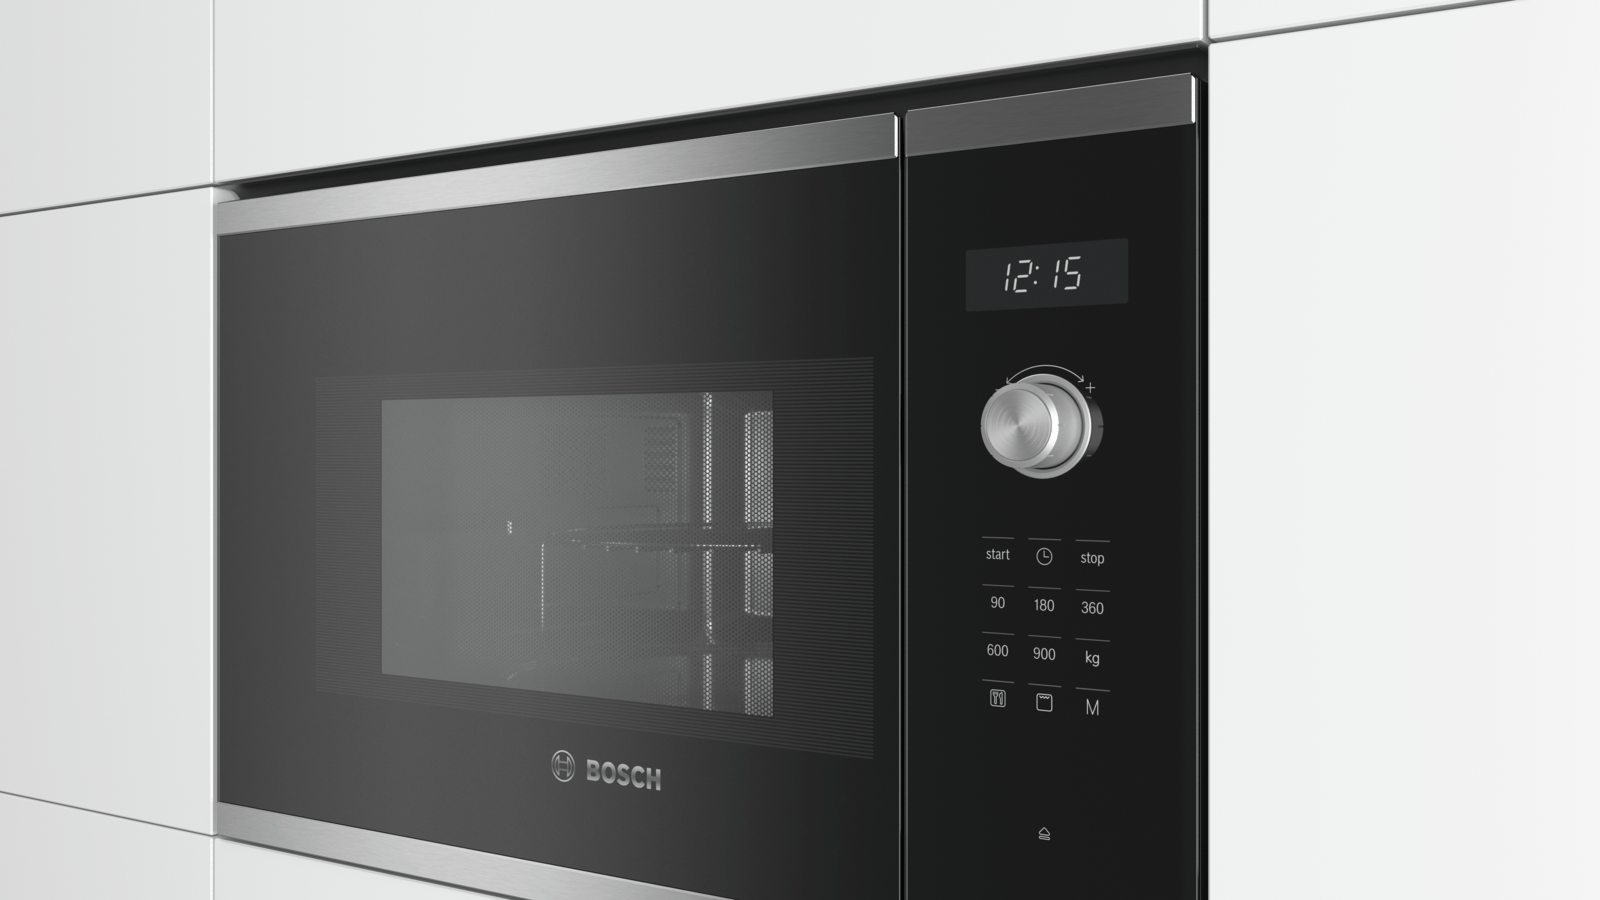 Bosch Bel554ms0a Built In Microwave Oven